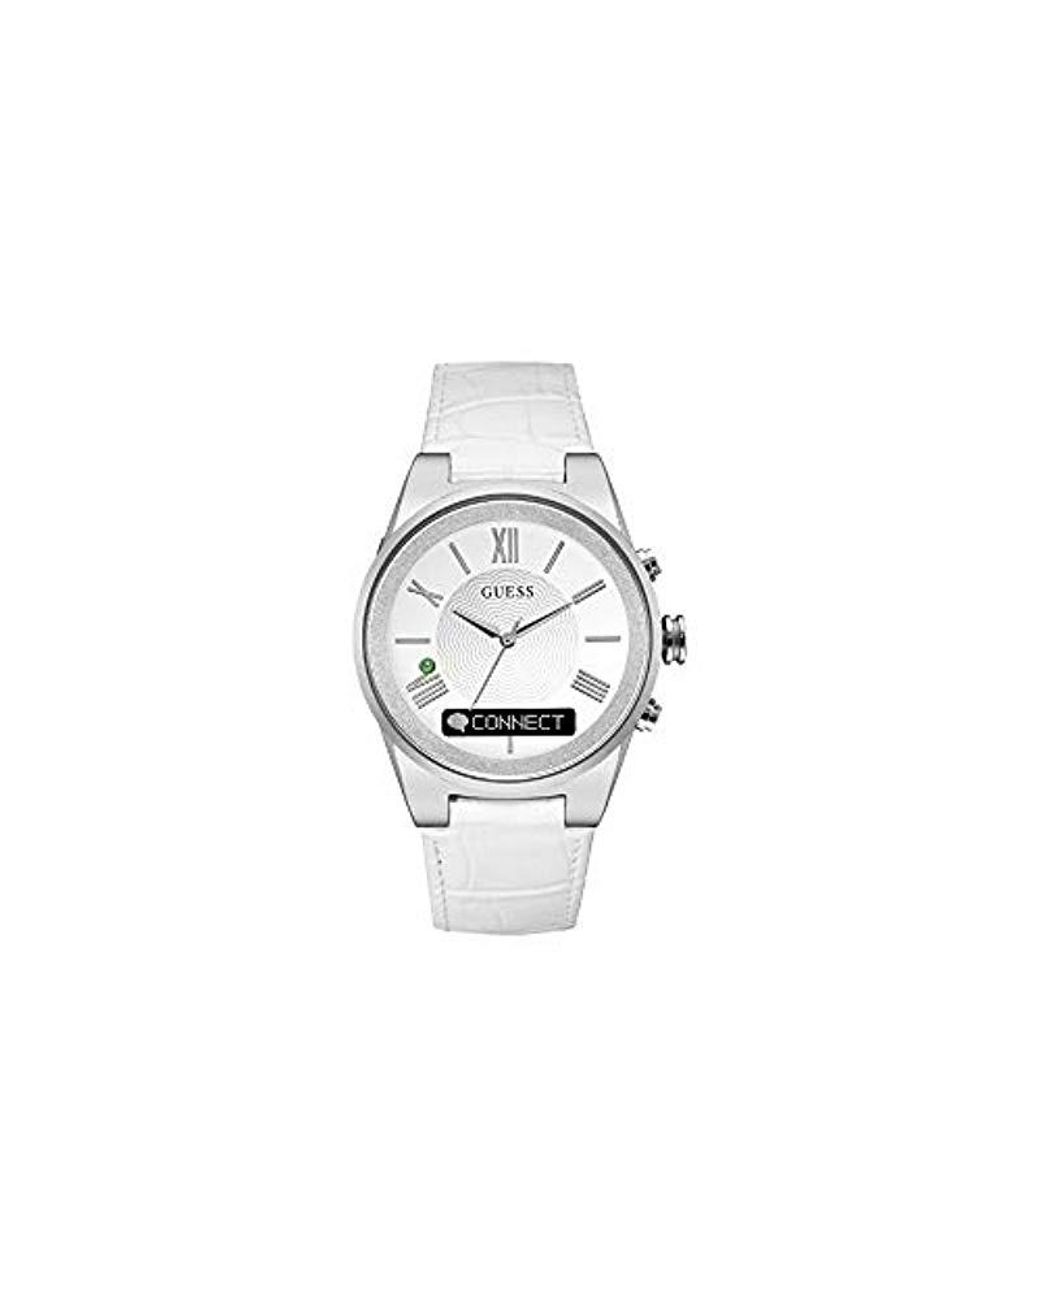 Guess Leather Connect Watches C0002mc1 in White - Lyst